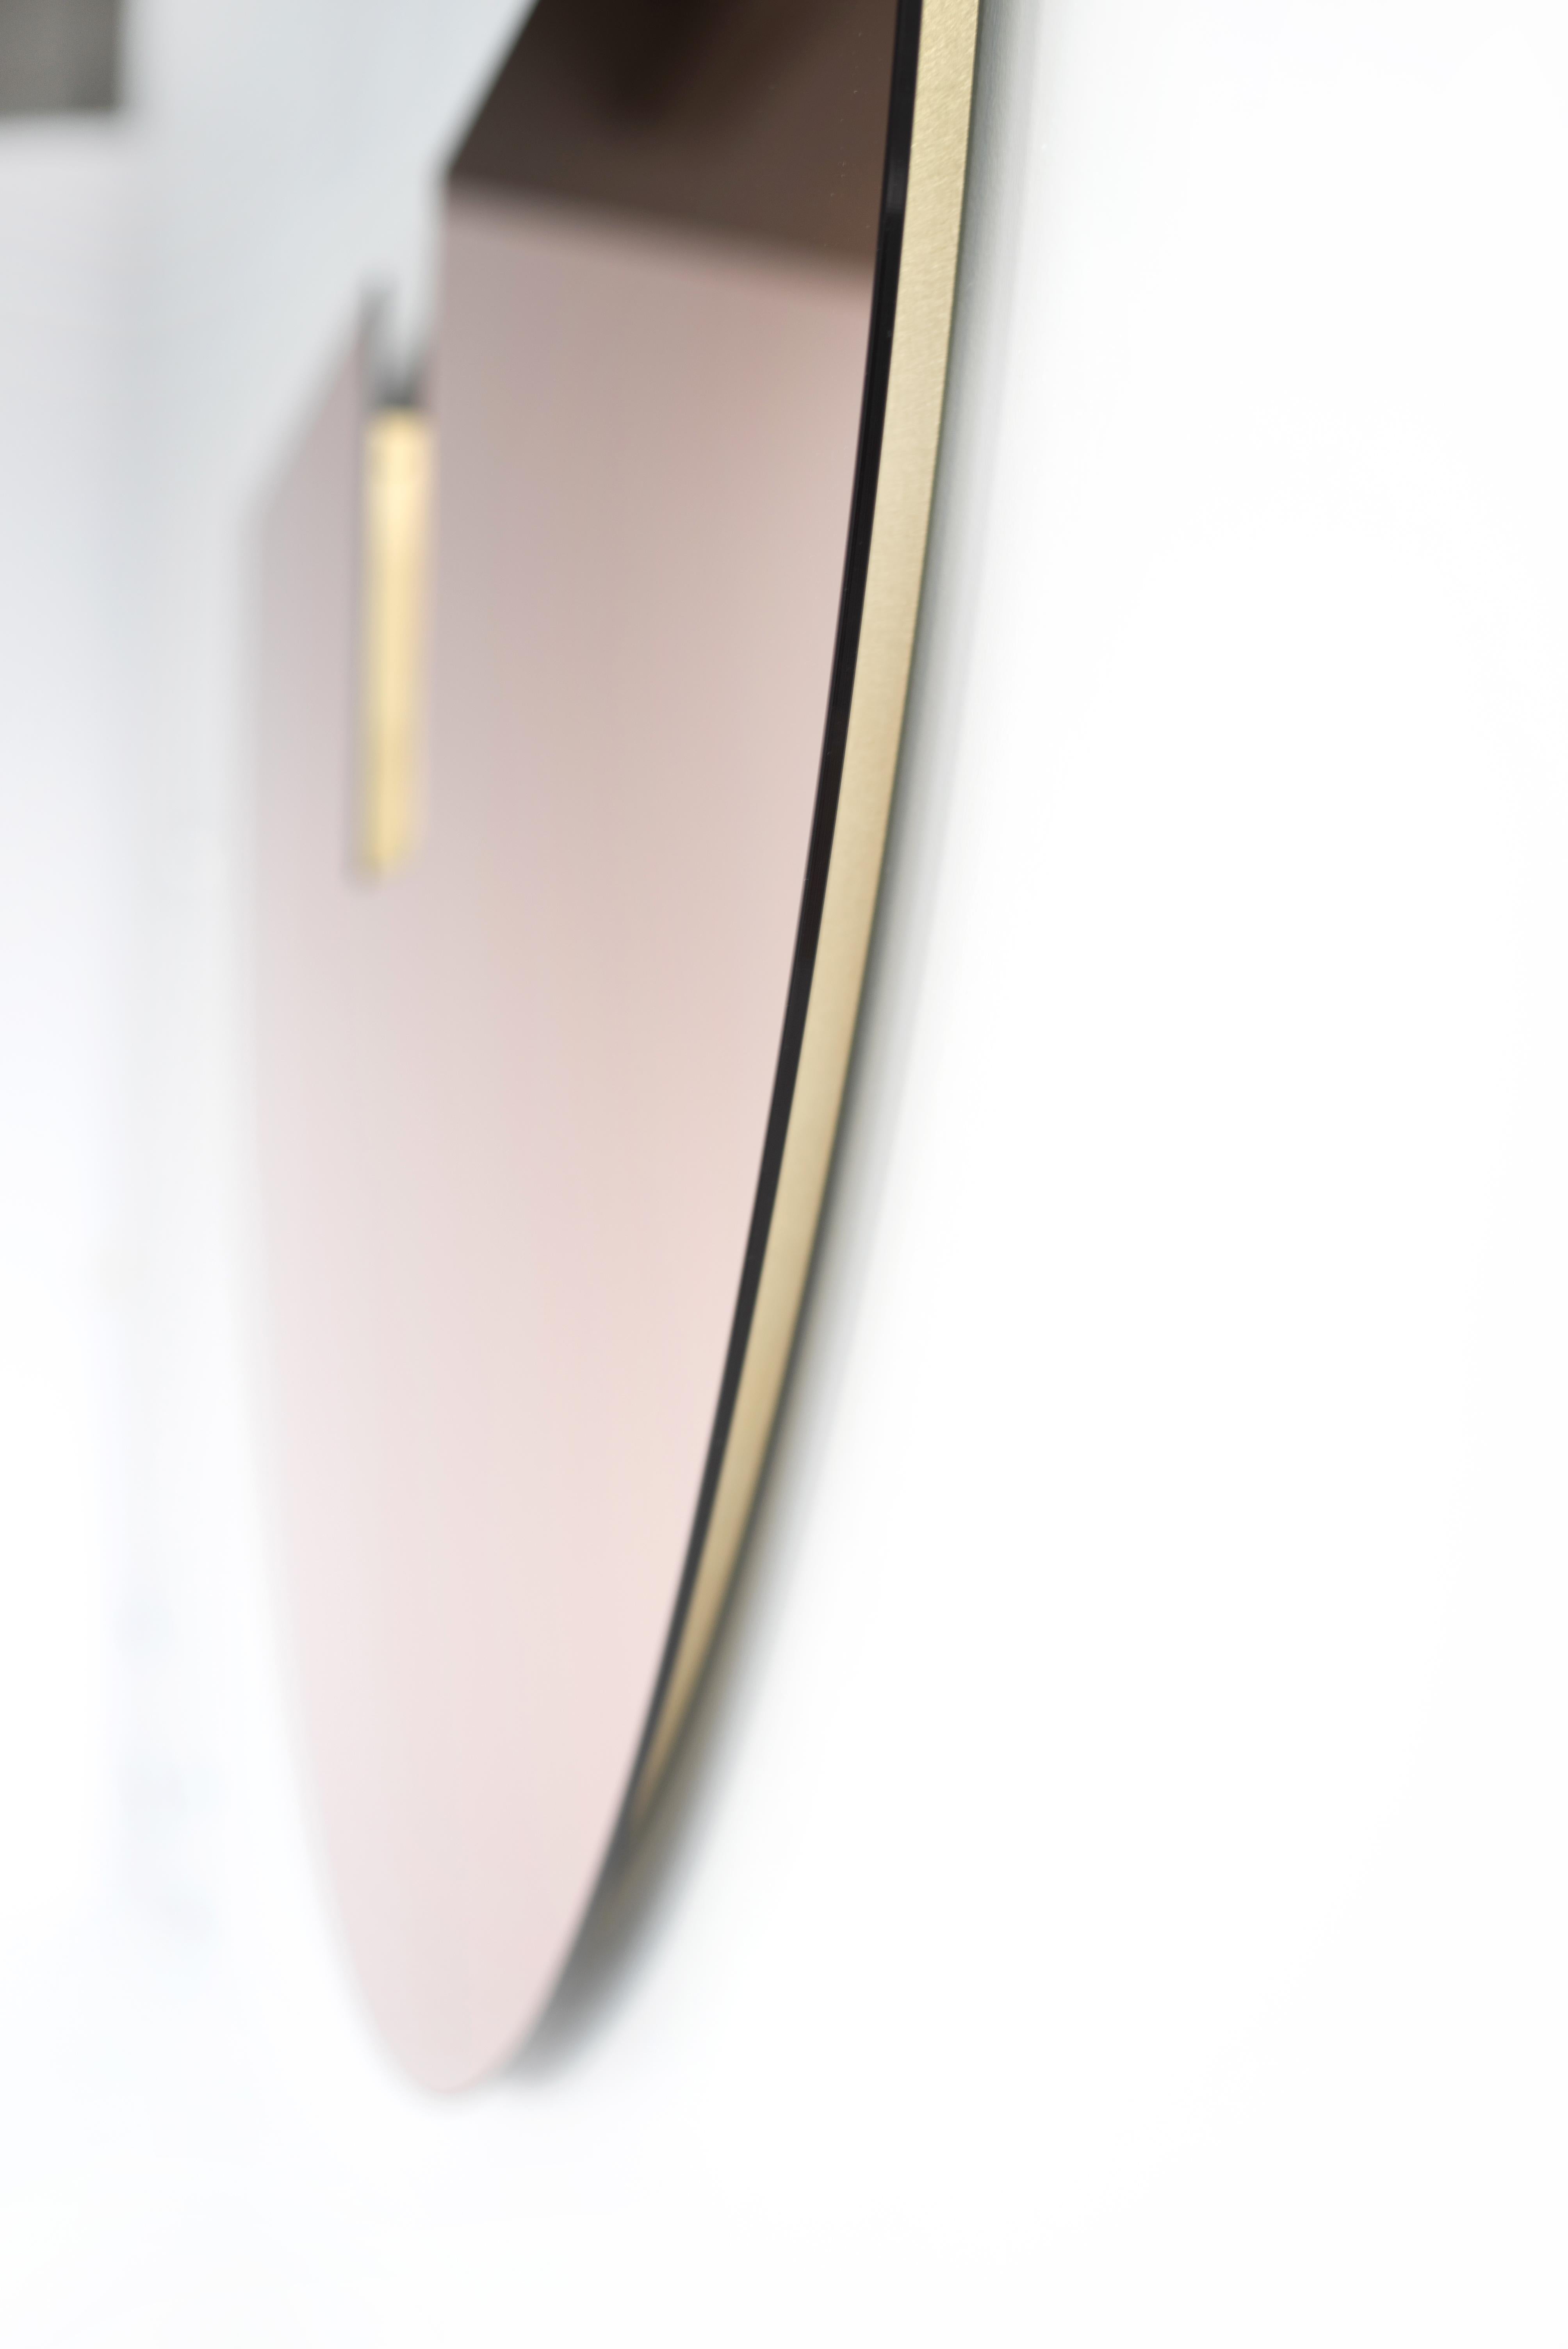 American Large Rose Gold Mirror, Contemporary Taurus Mirror by Ben & Aja Blanc For Sale